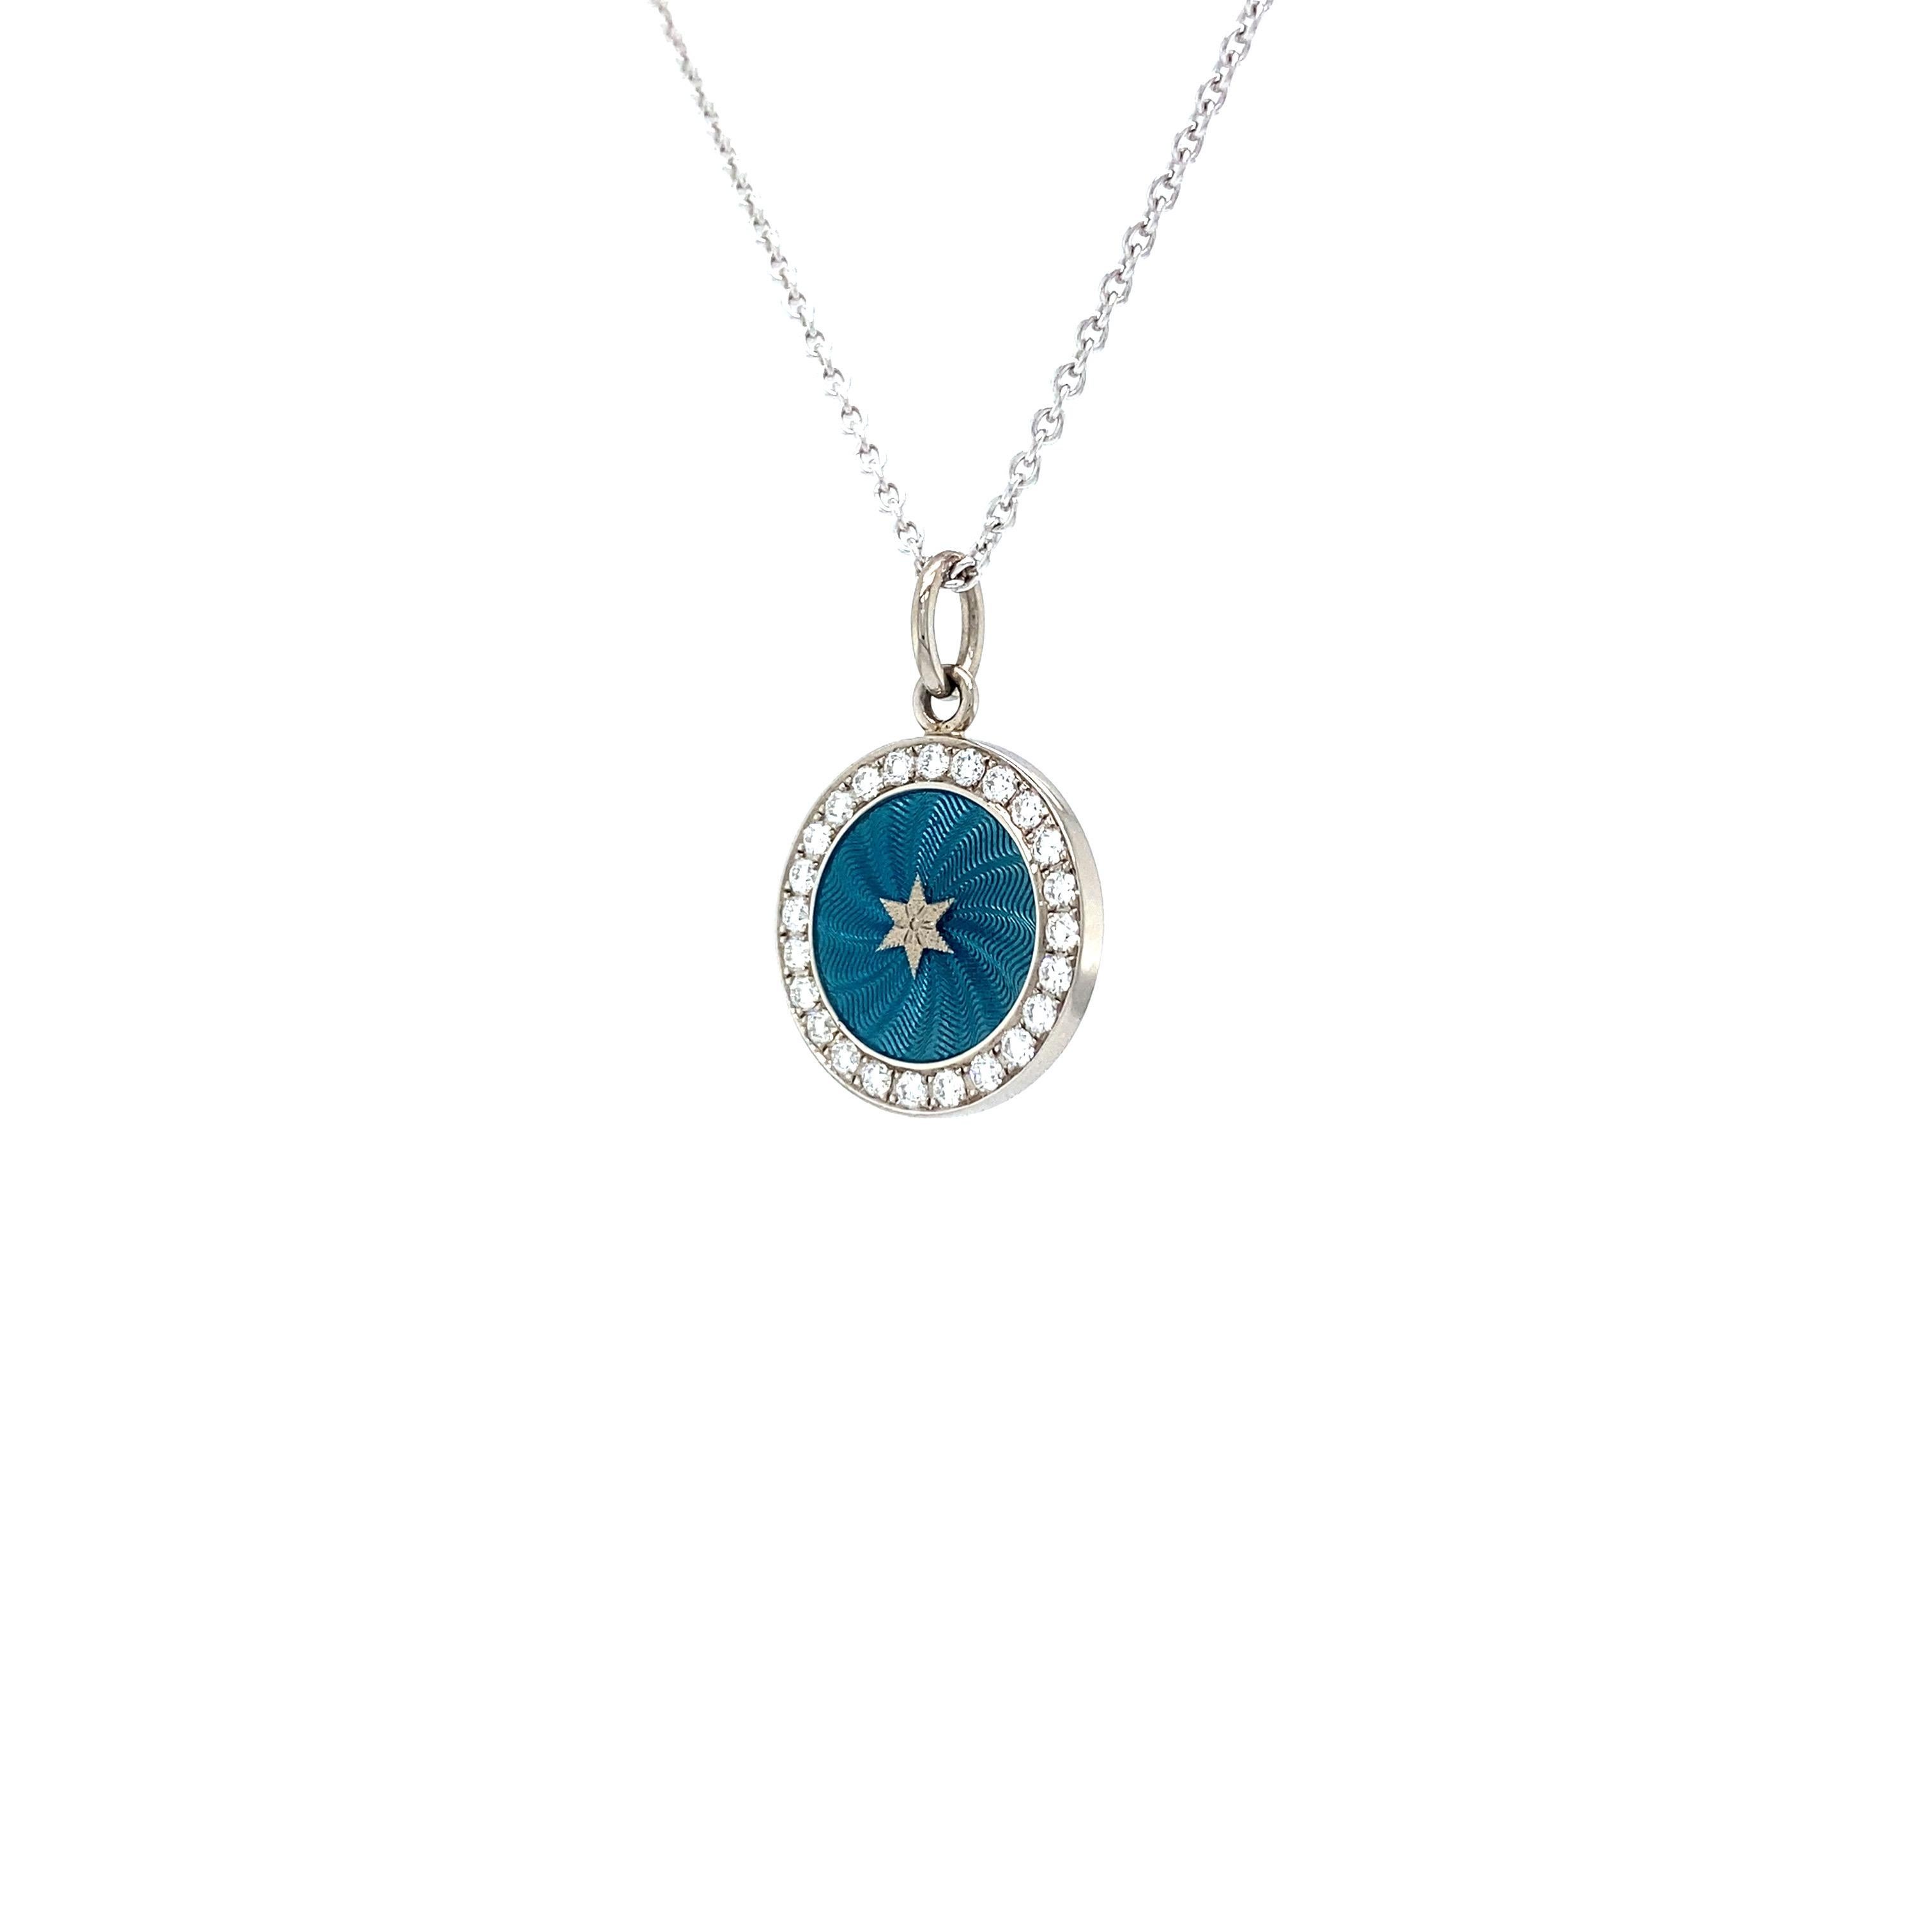 Round Disc Pendant with Star 18k White Gold Turquoise Enamel 24 Diamonds 0.36 ct For Sale 7